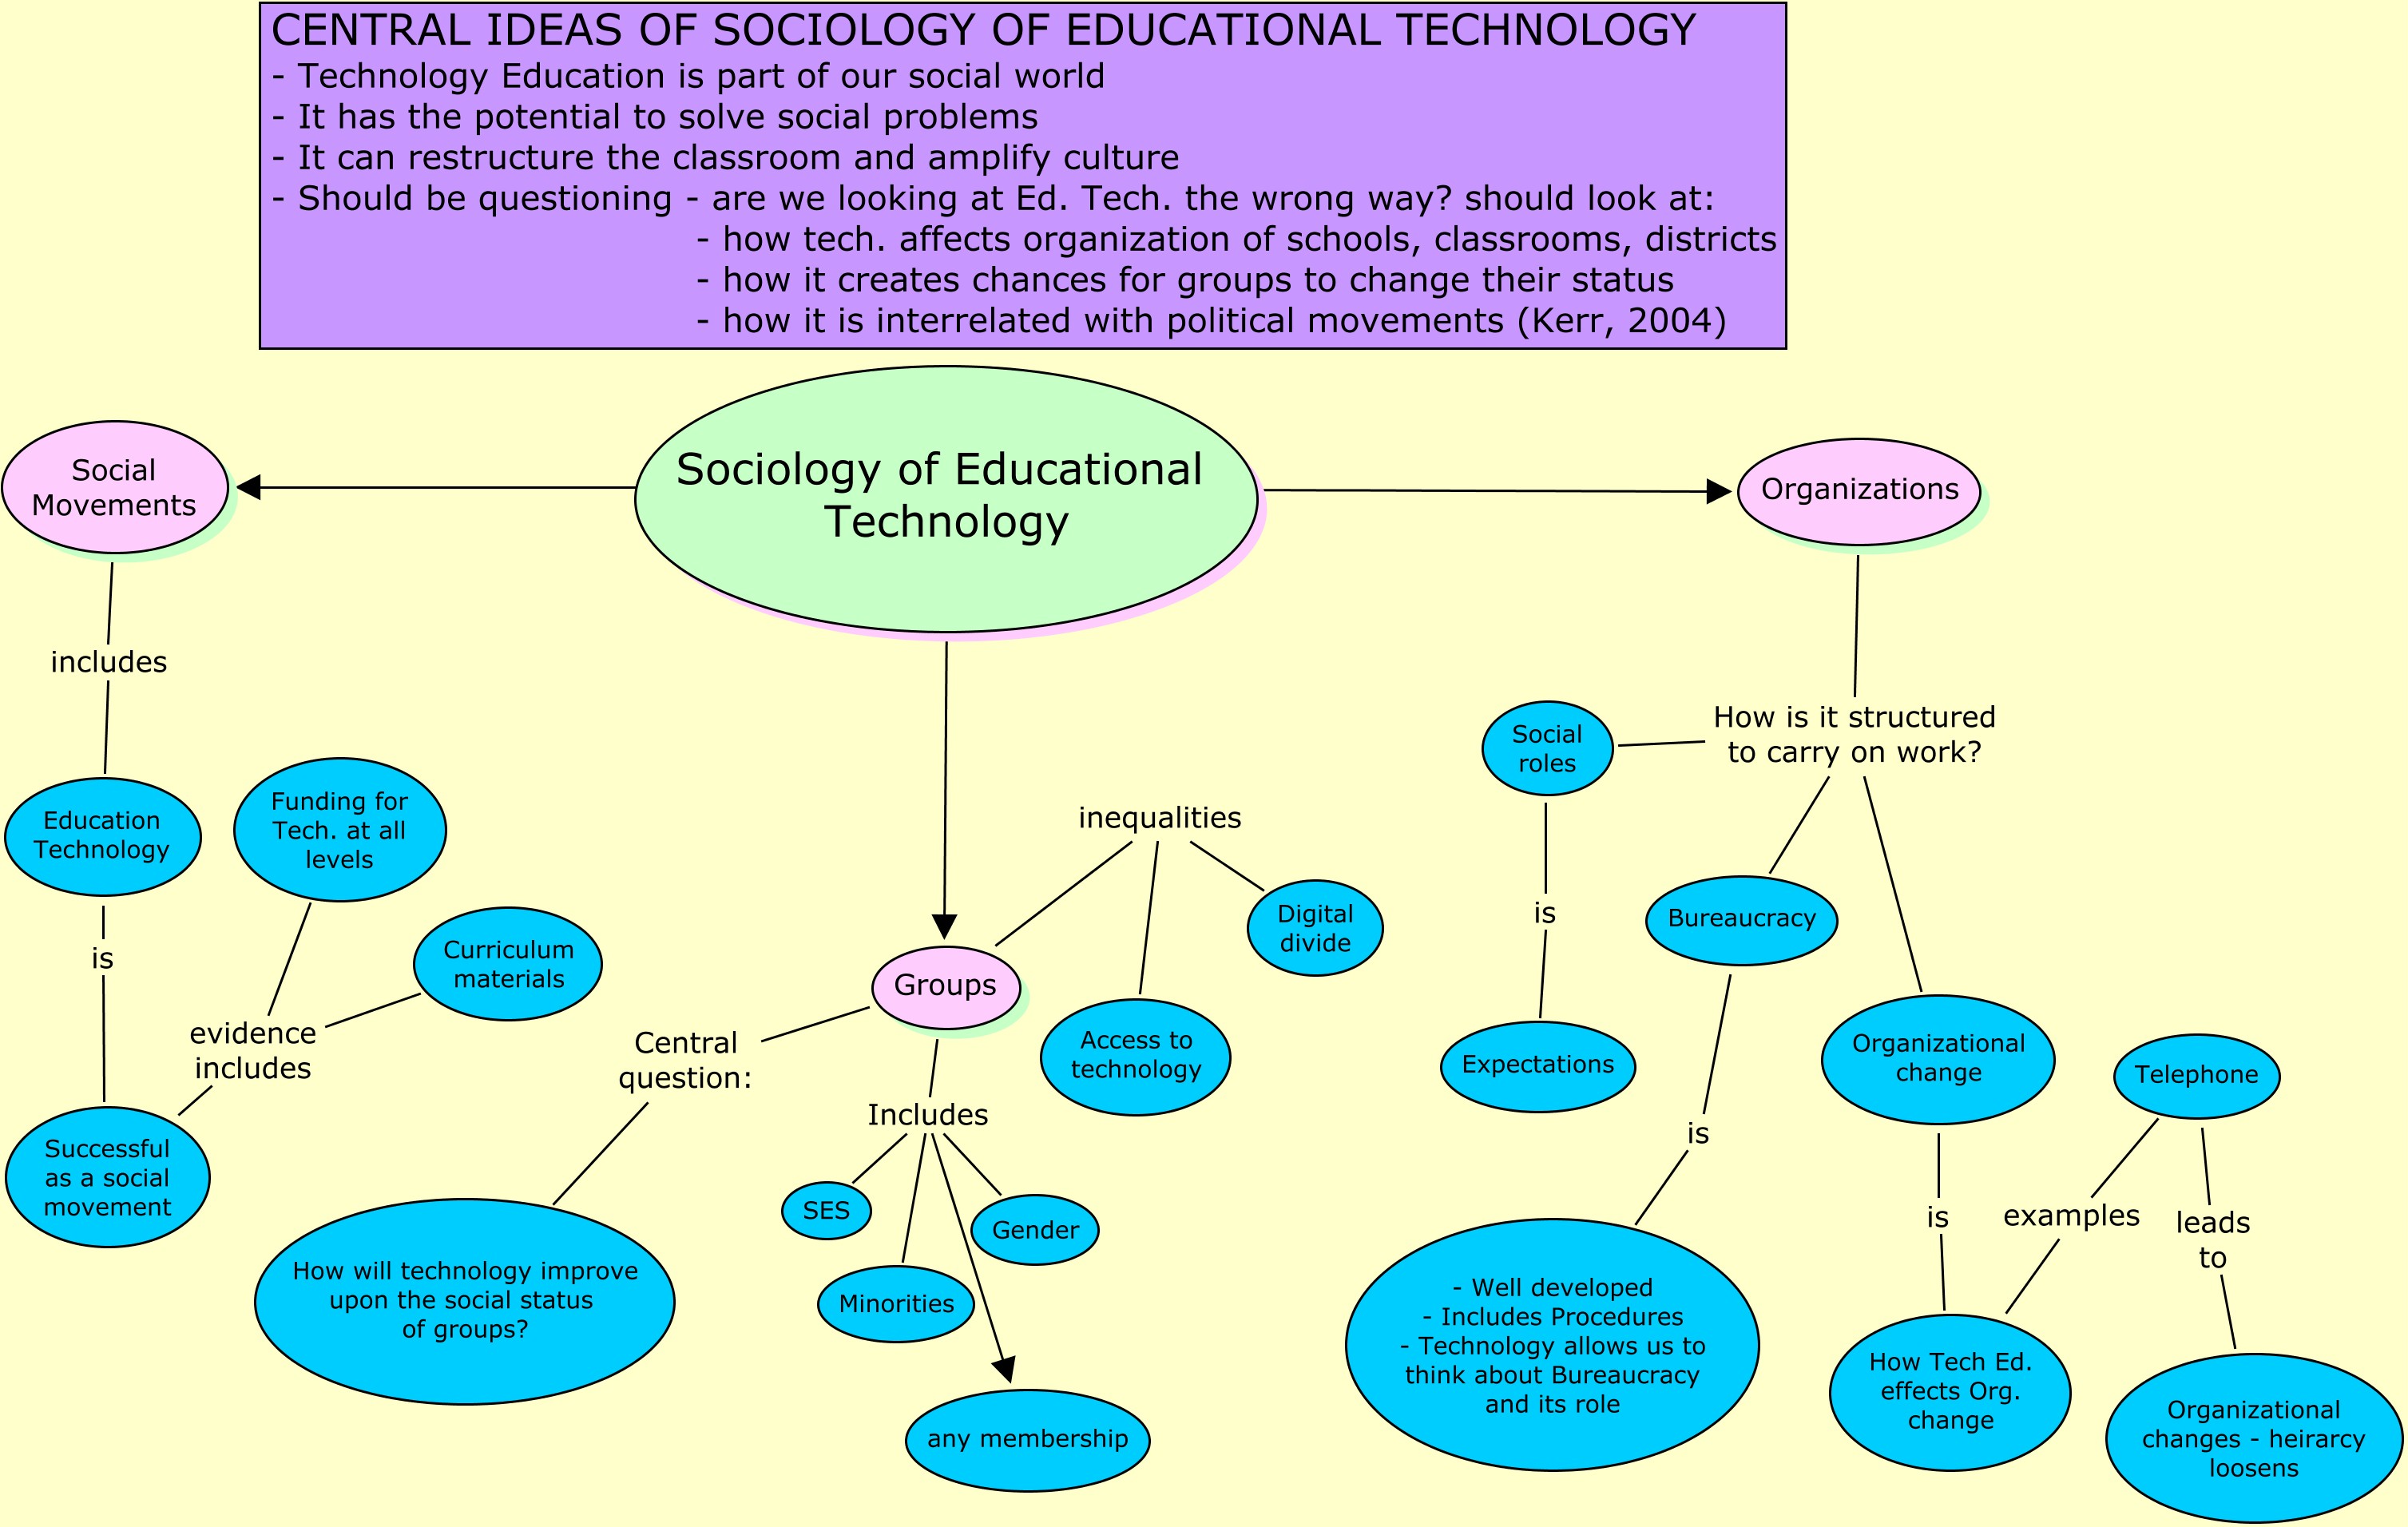 Concept Map for Sociology of Educational Technology.